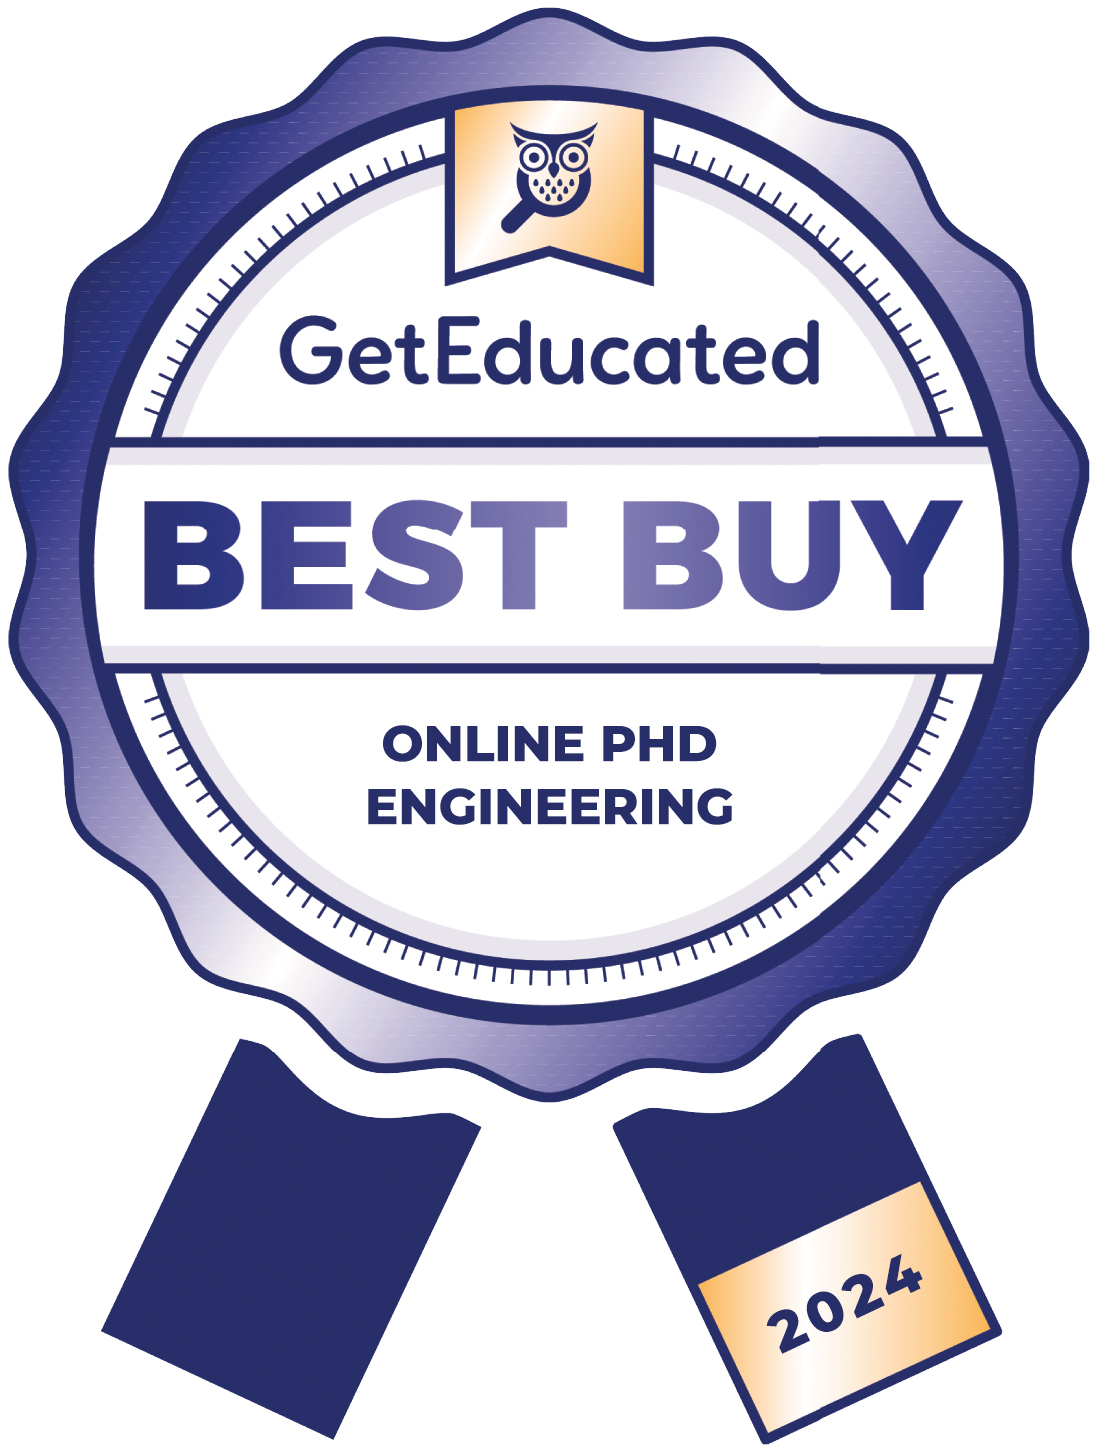 Rankings of the cheapest online PhD engineering programs